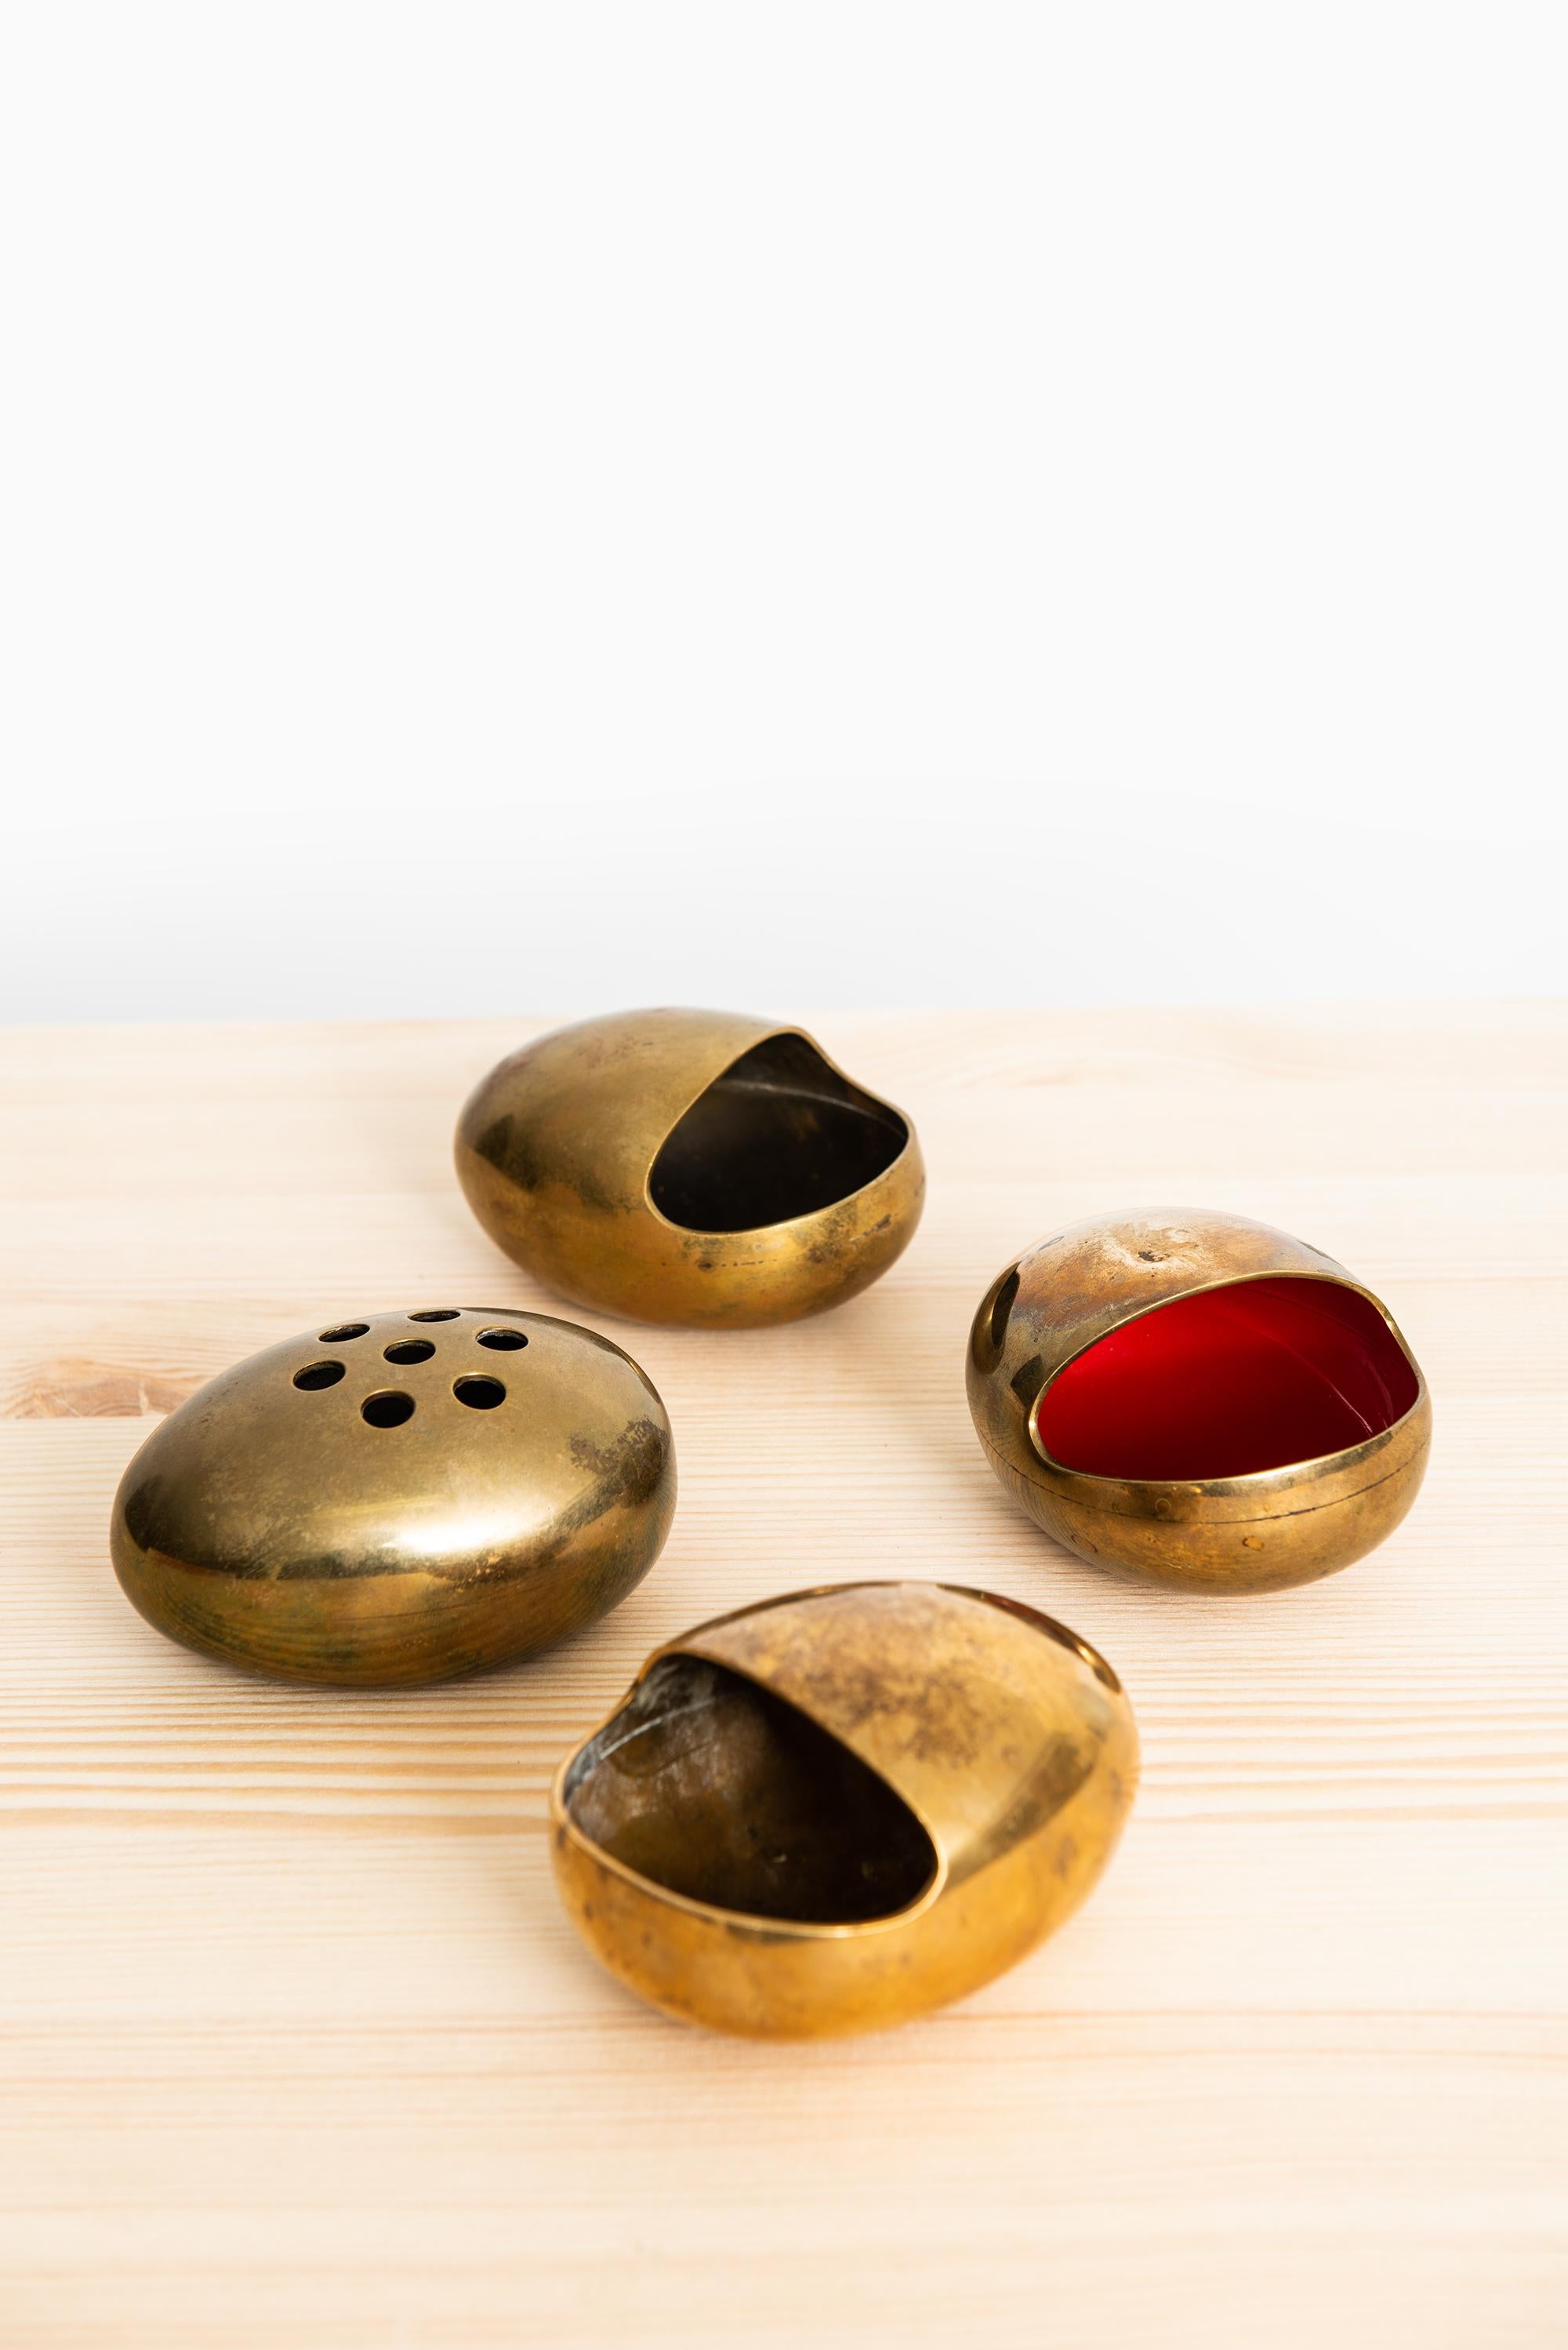 Set of 4 ashtrays in brass. Produced by Cohr in Denmark.